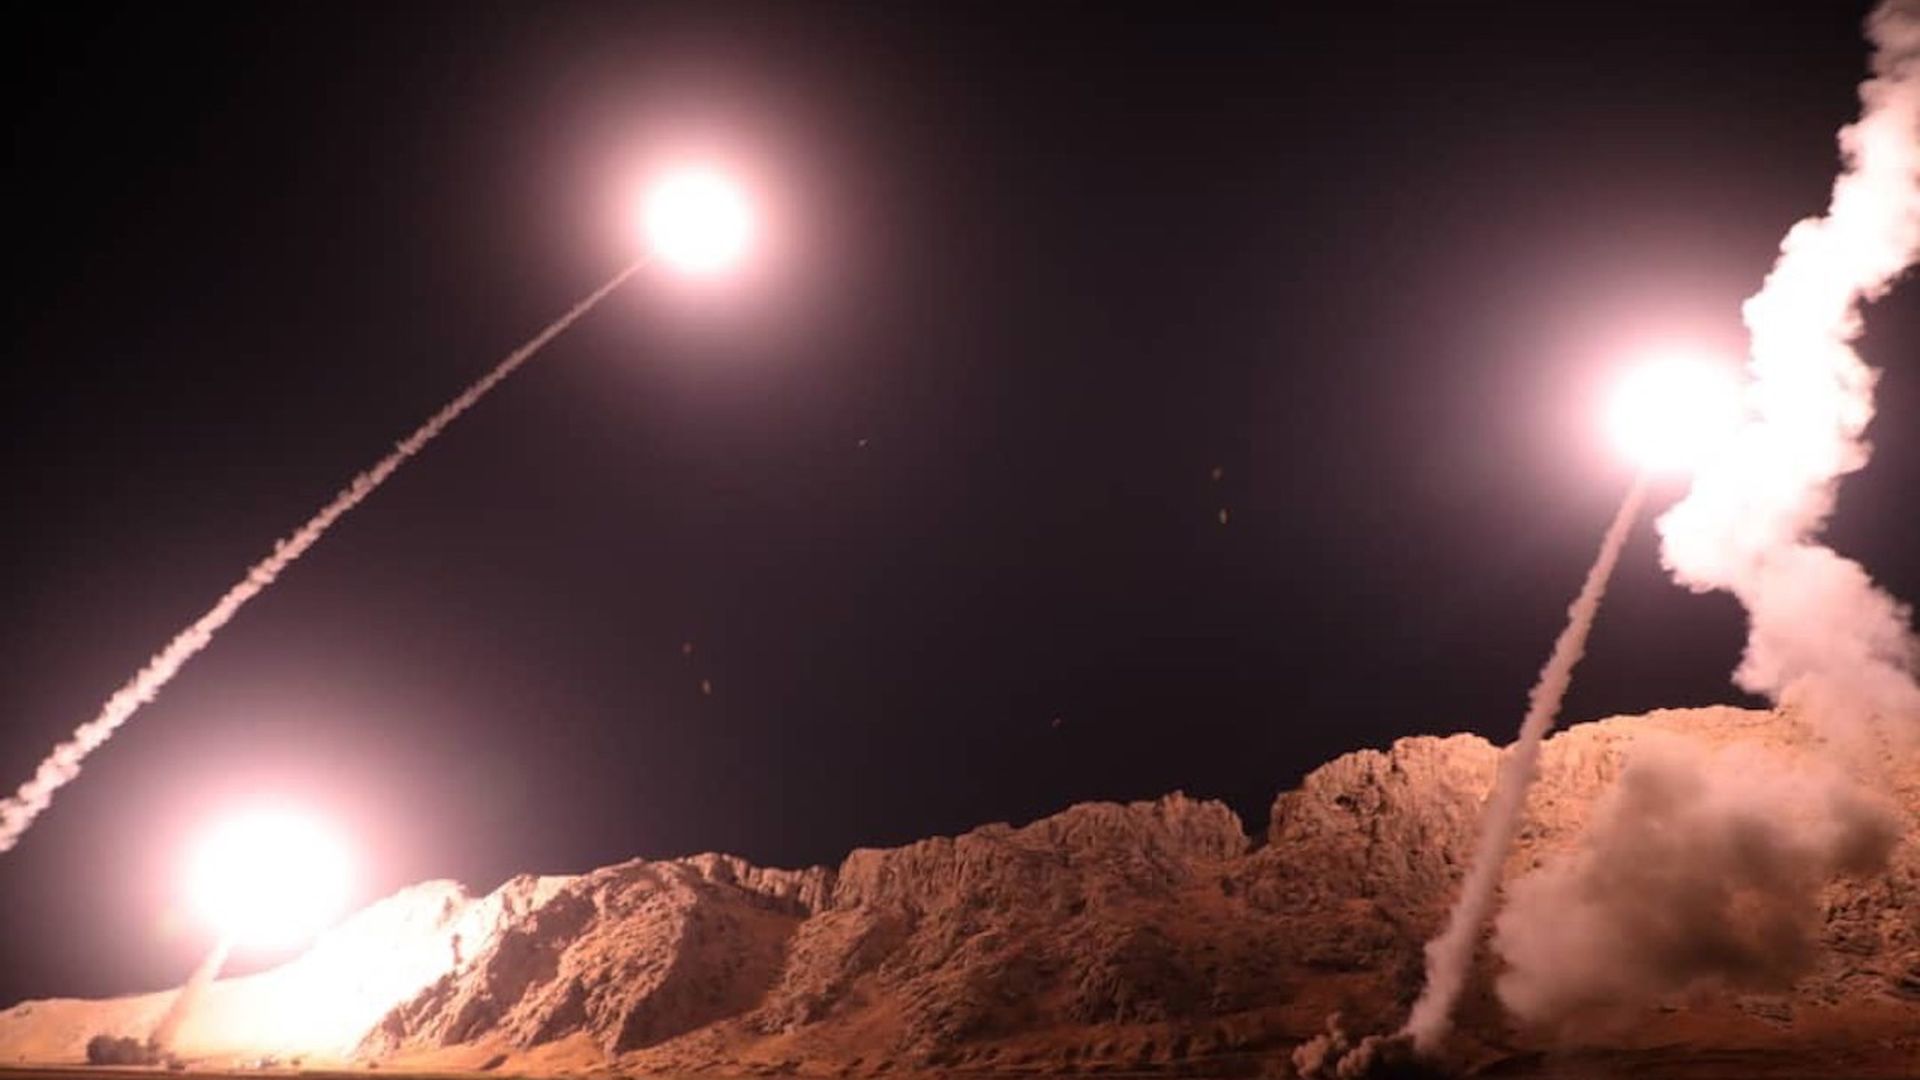 Zulfiqar and Qiam ballistic missiles, targeting Syria, are launched by Irans Revolutionary Guard in Kermanshah, Iran on October 01, 2018.